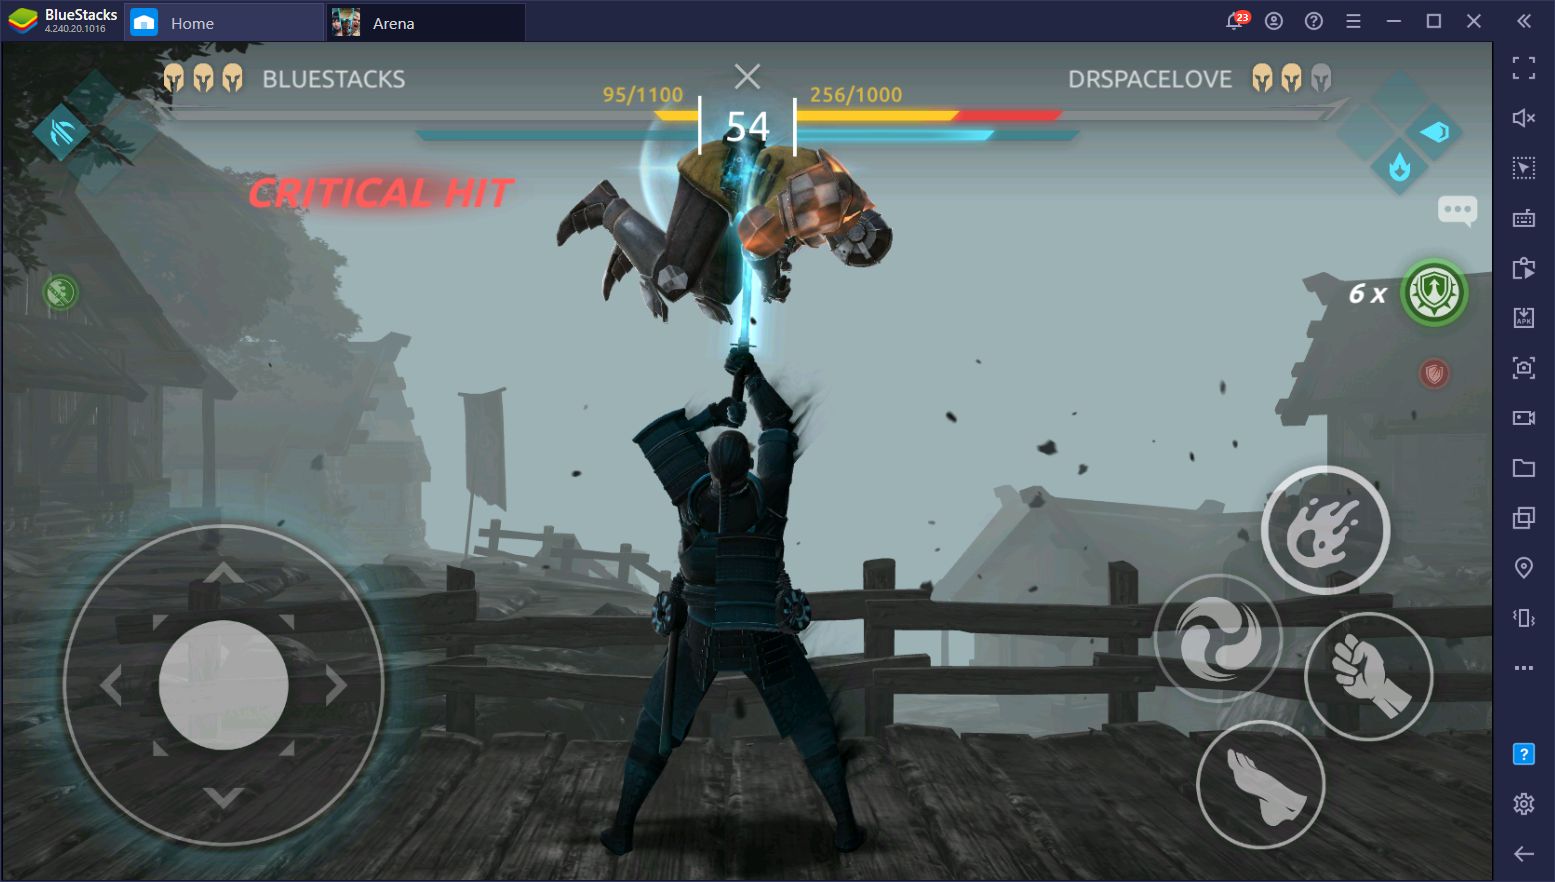 The Top 10 Mobile Games to Play on PC With BlueStacks this Thanksgiving Season